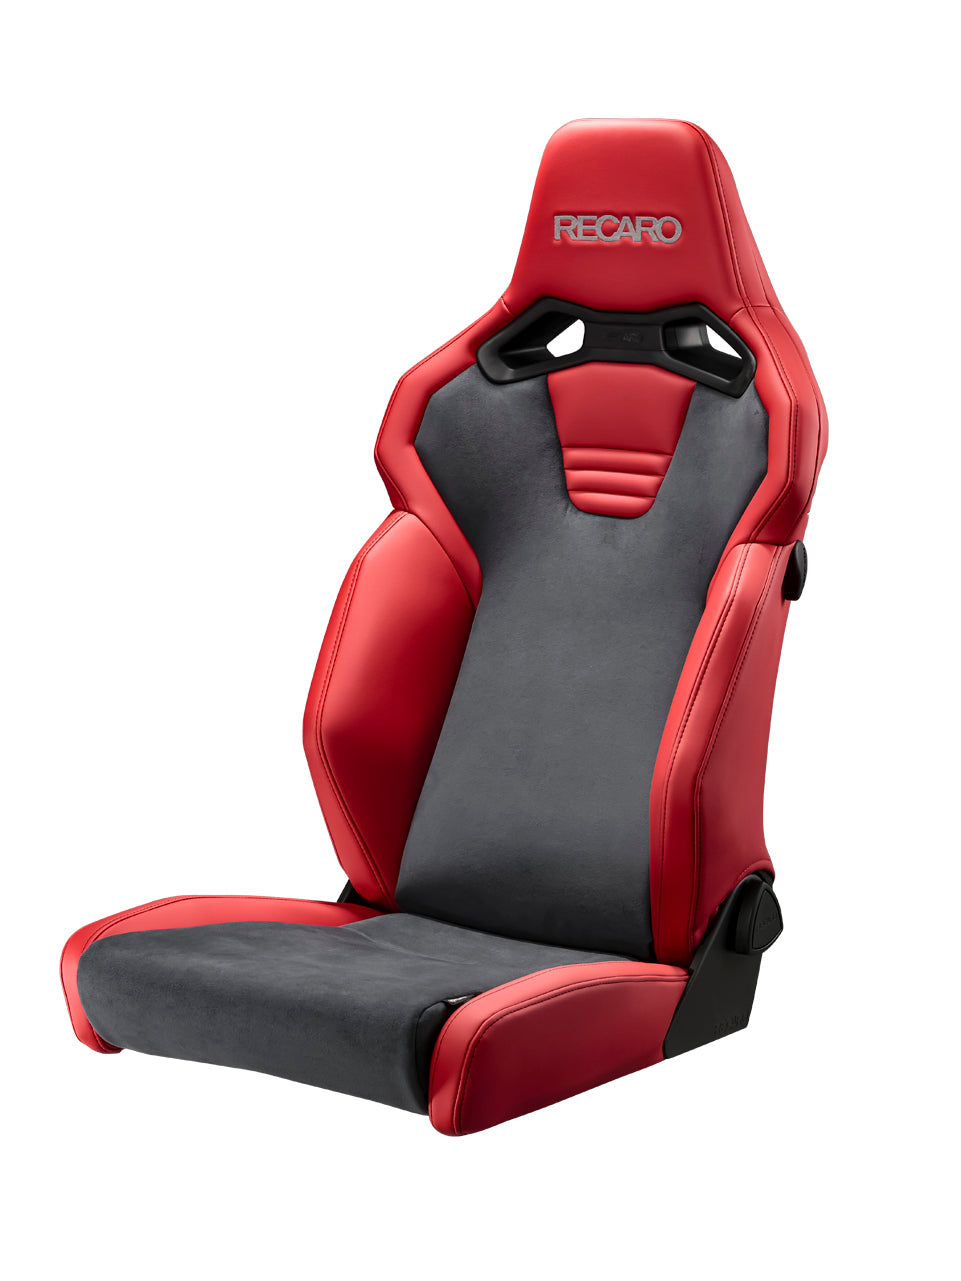 RECARO SR-C UT100 A R CG RD ARTIFICIAL LEATHER RED COLOR AND ULTRA SUEDE CHARCOAL GRAY COLOR SEAT ARMREST ATTACHEBLE FOR  81-121.28.647-0